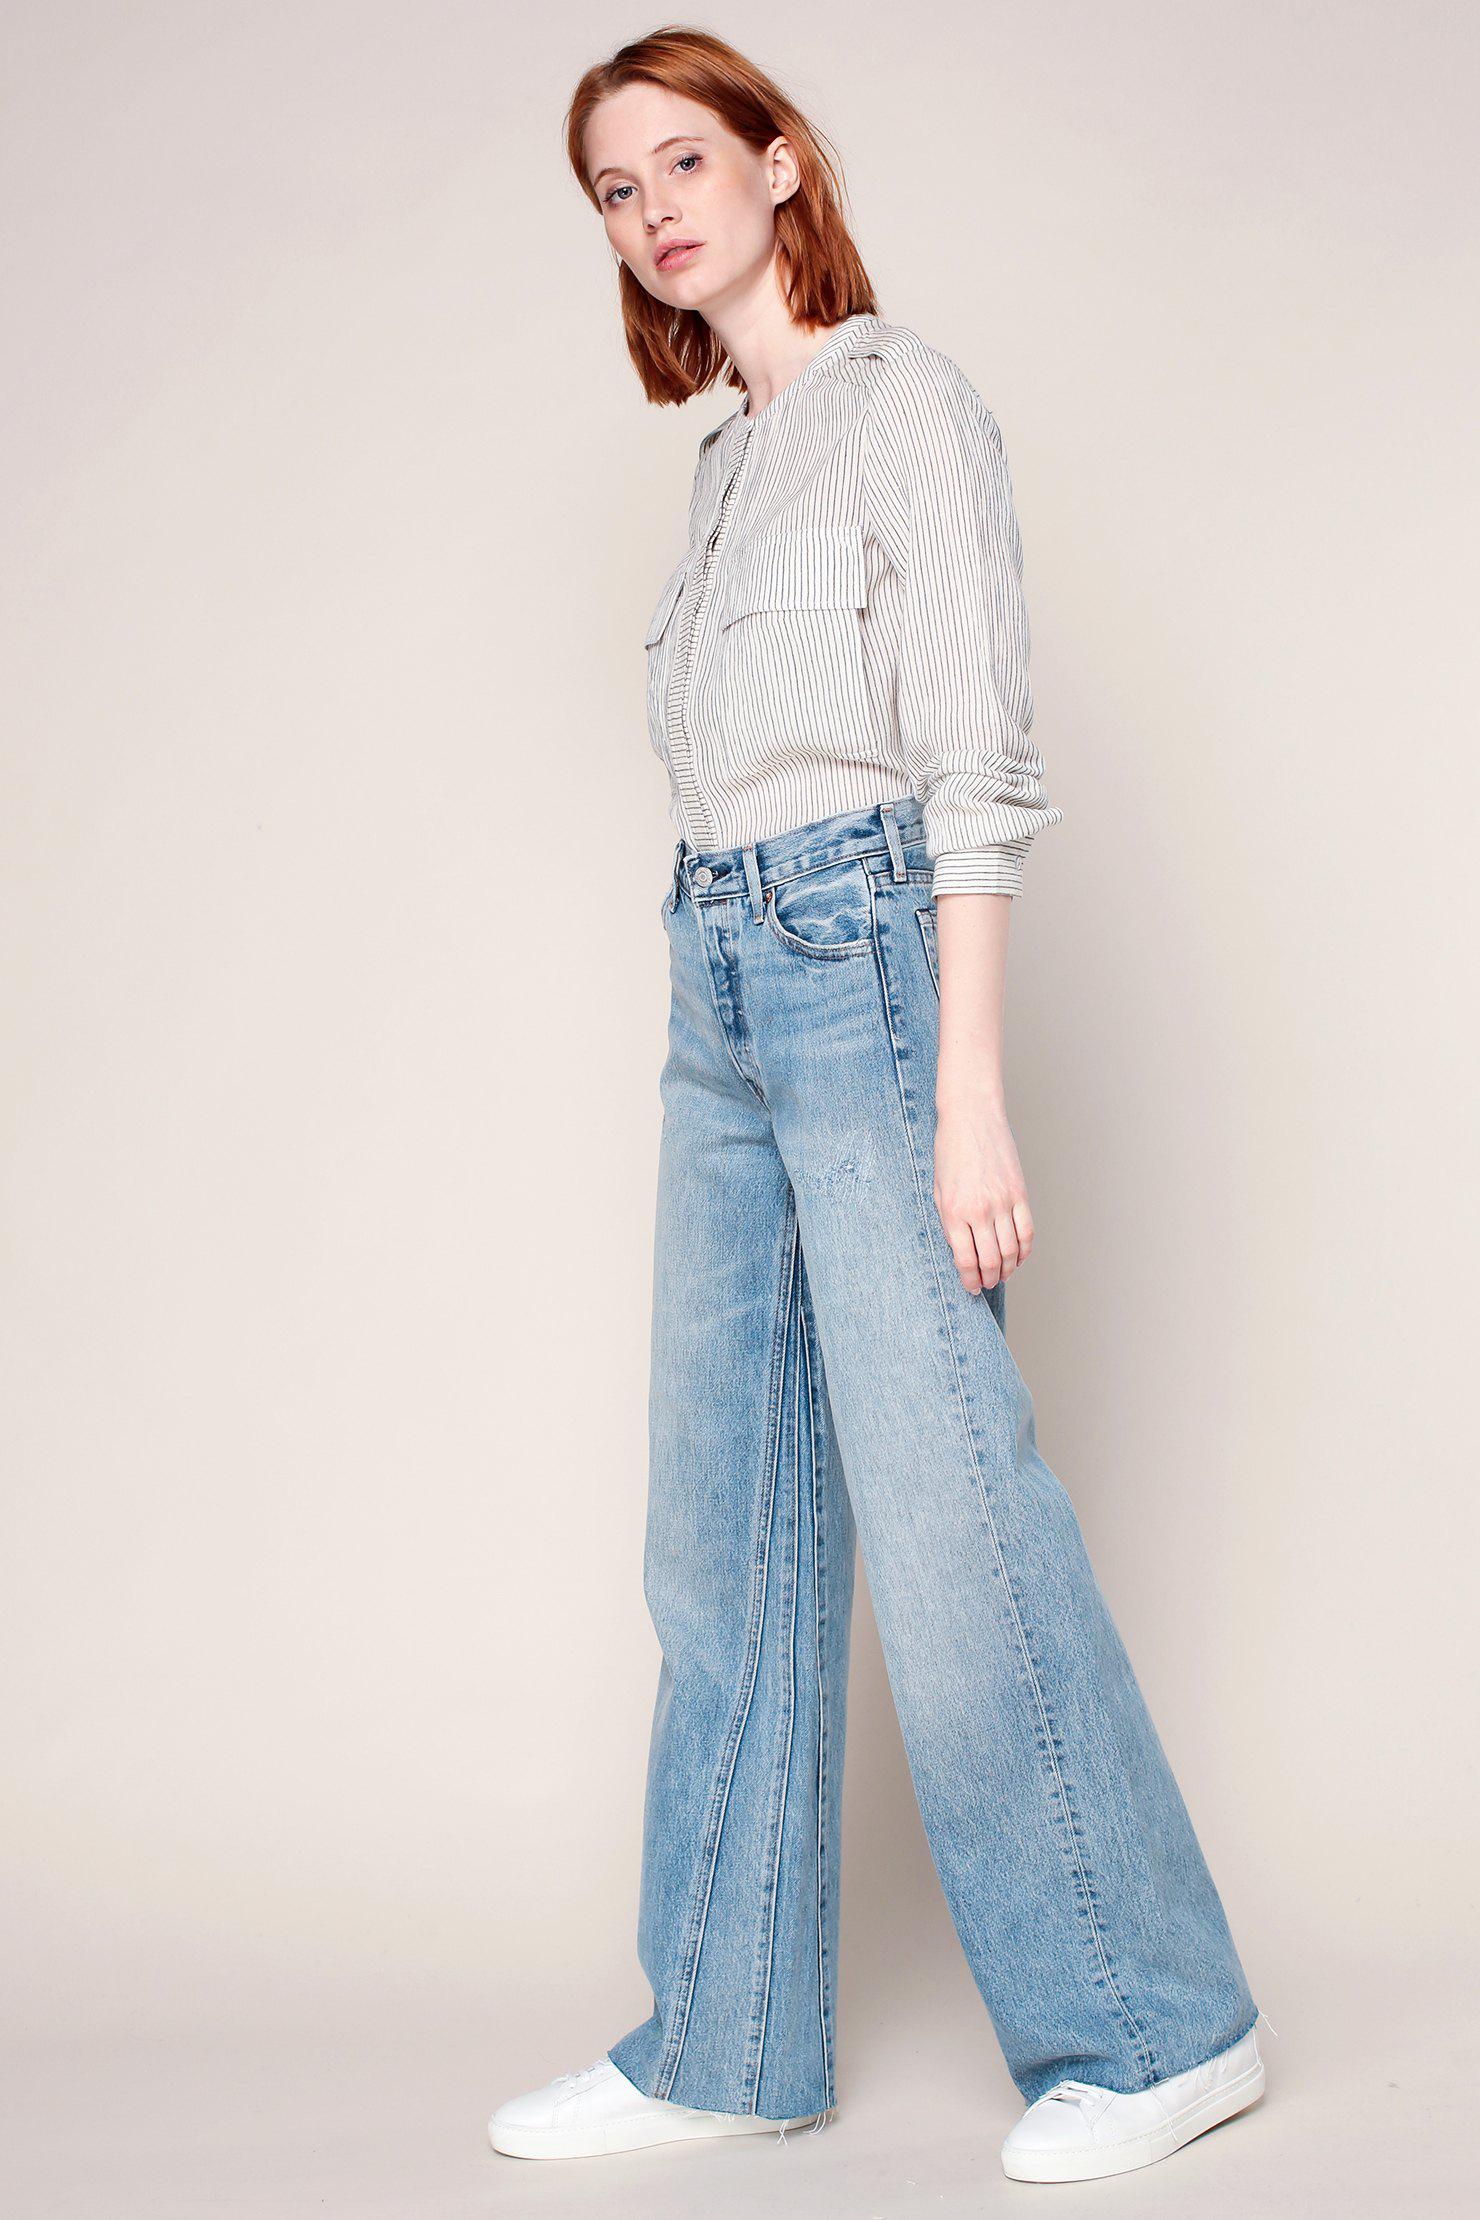 Lyst - Levi'S Flared Jeans in Blue